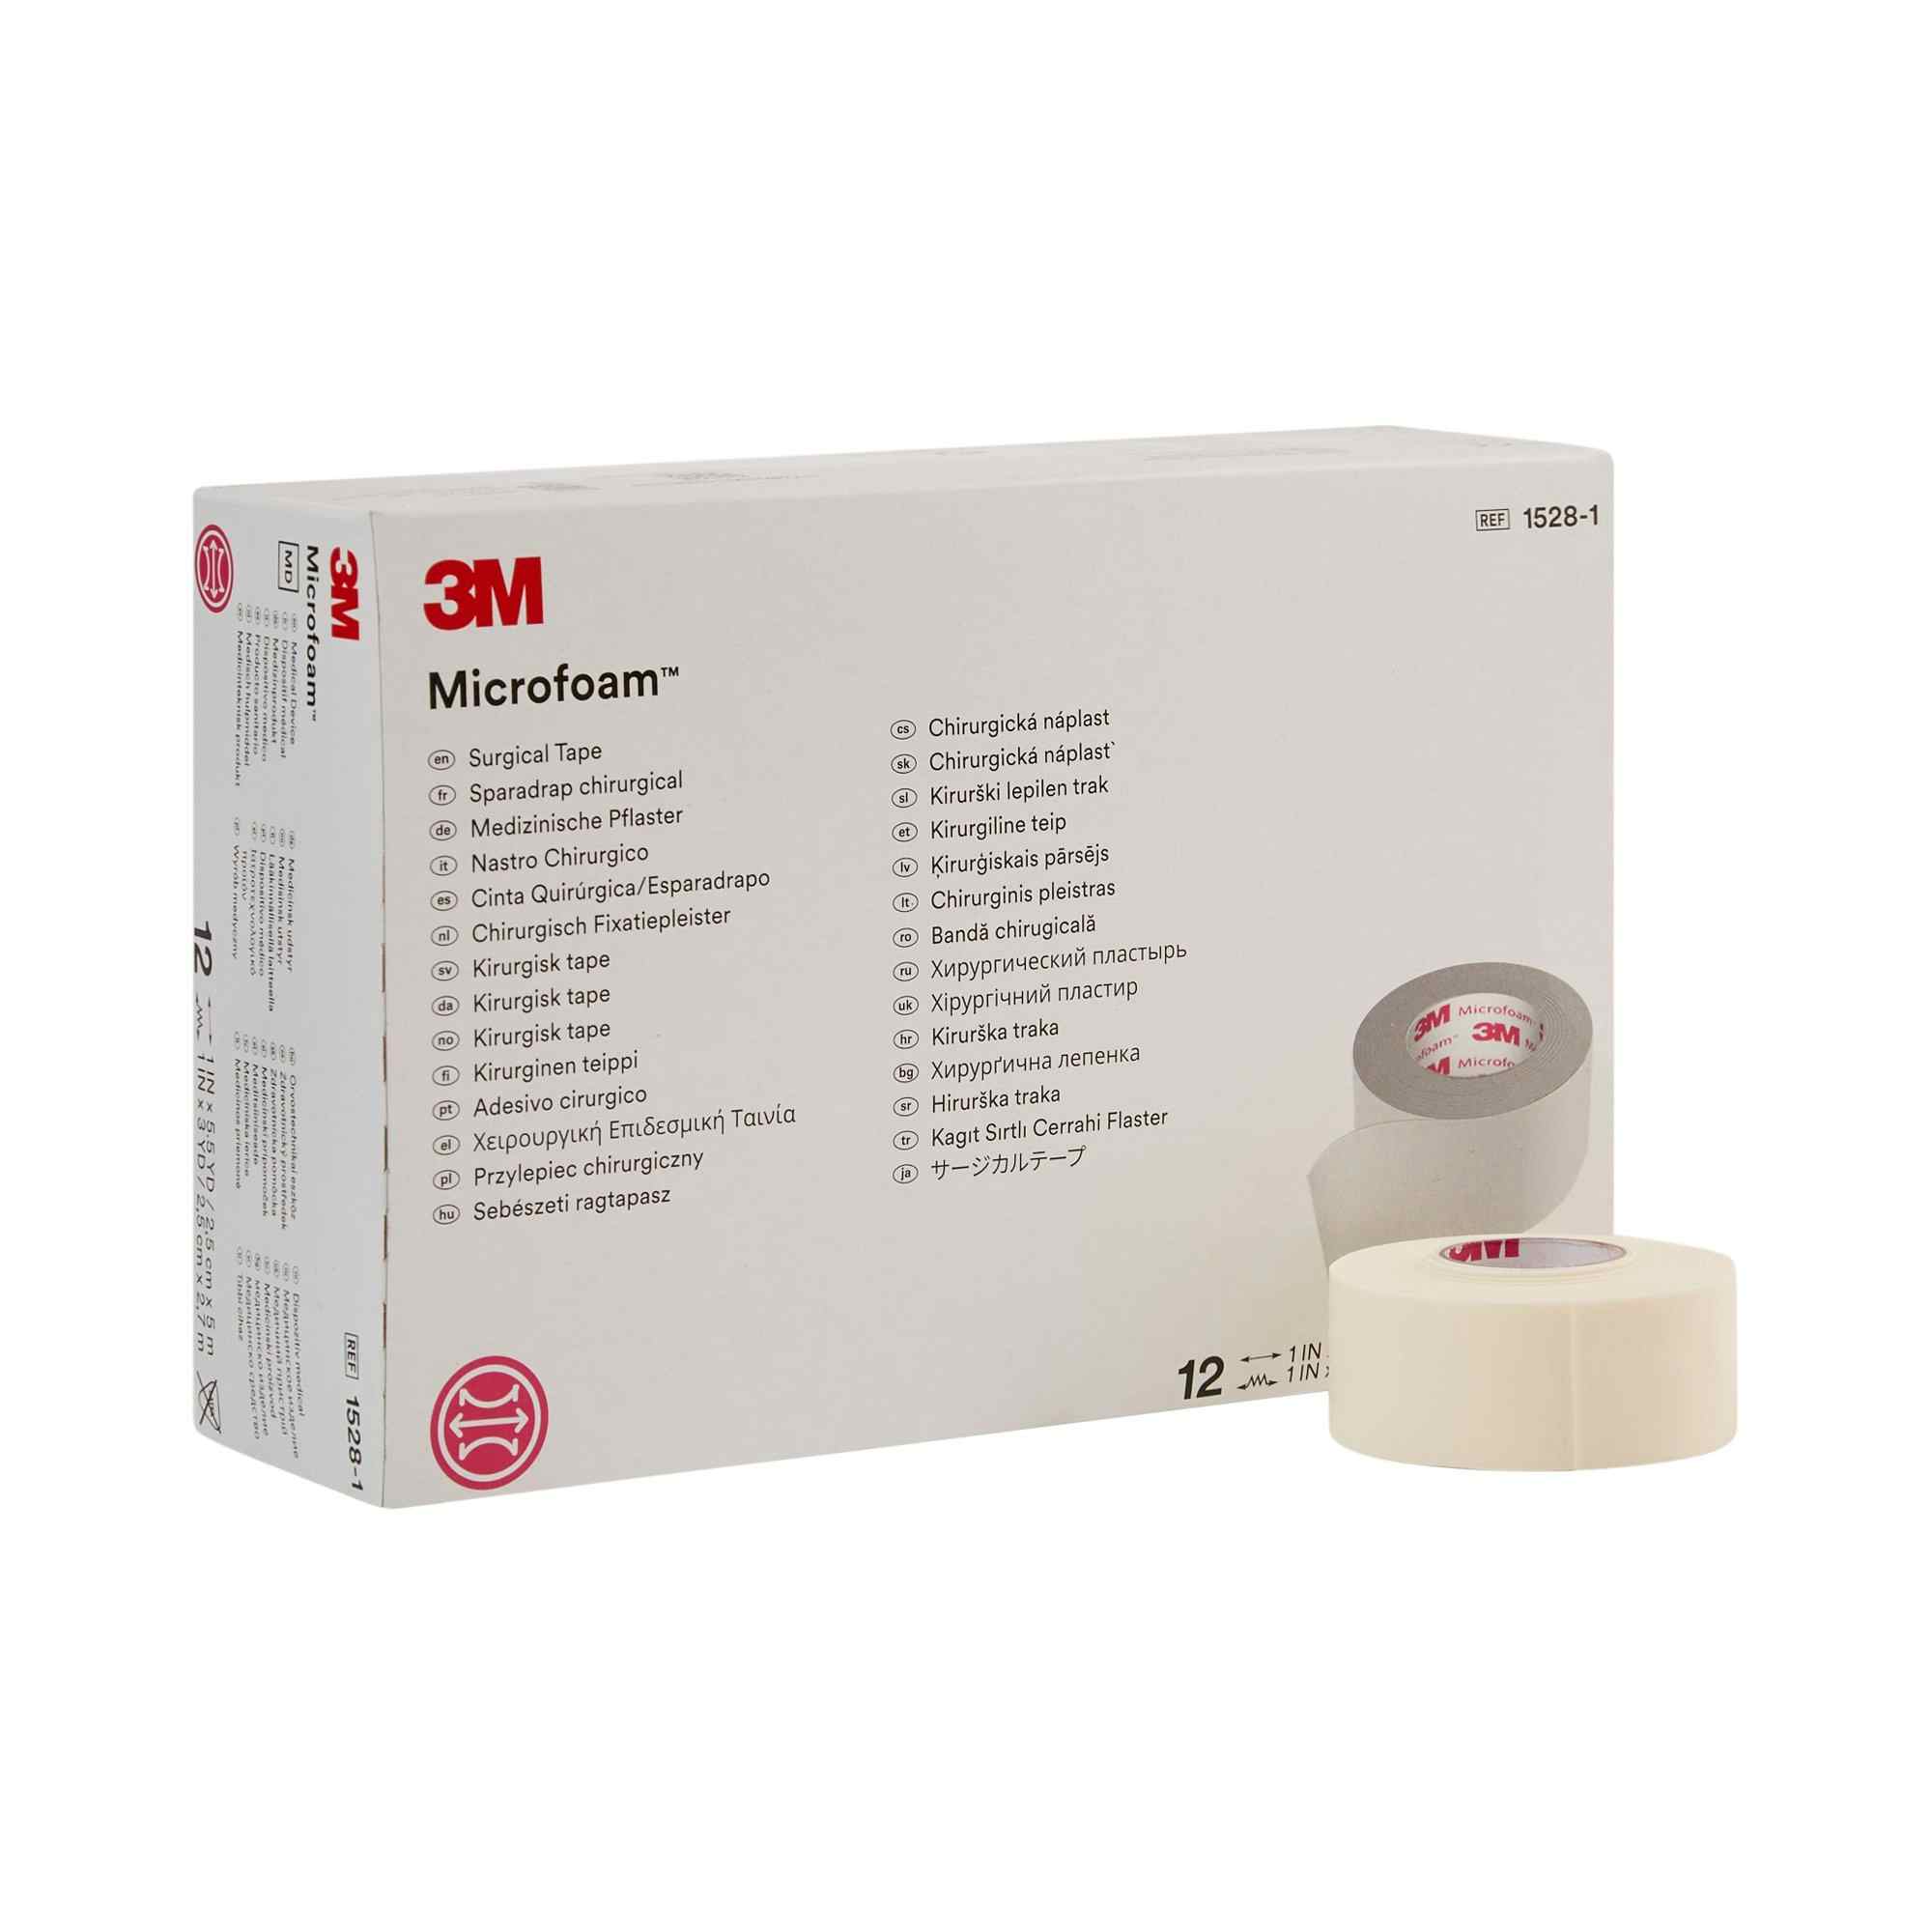 3M Microfoam Surgical Tape, Water-Resistant, Foam/Acrylic Adhesive, Elastic, 1 Inch x 5½ Yard, White, 1528-1, Box of 12